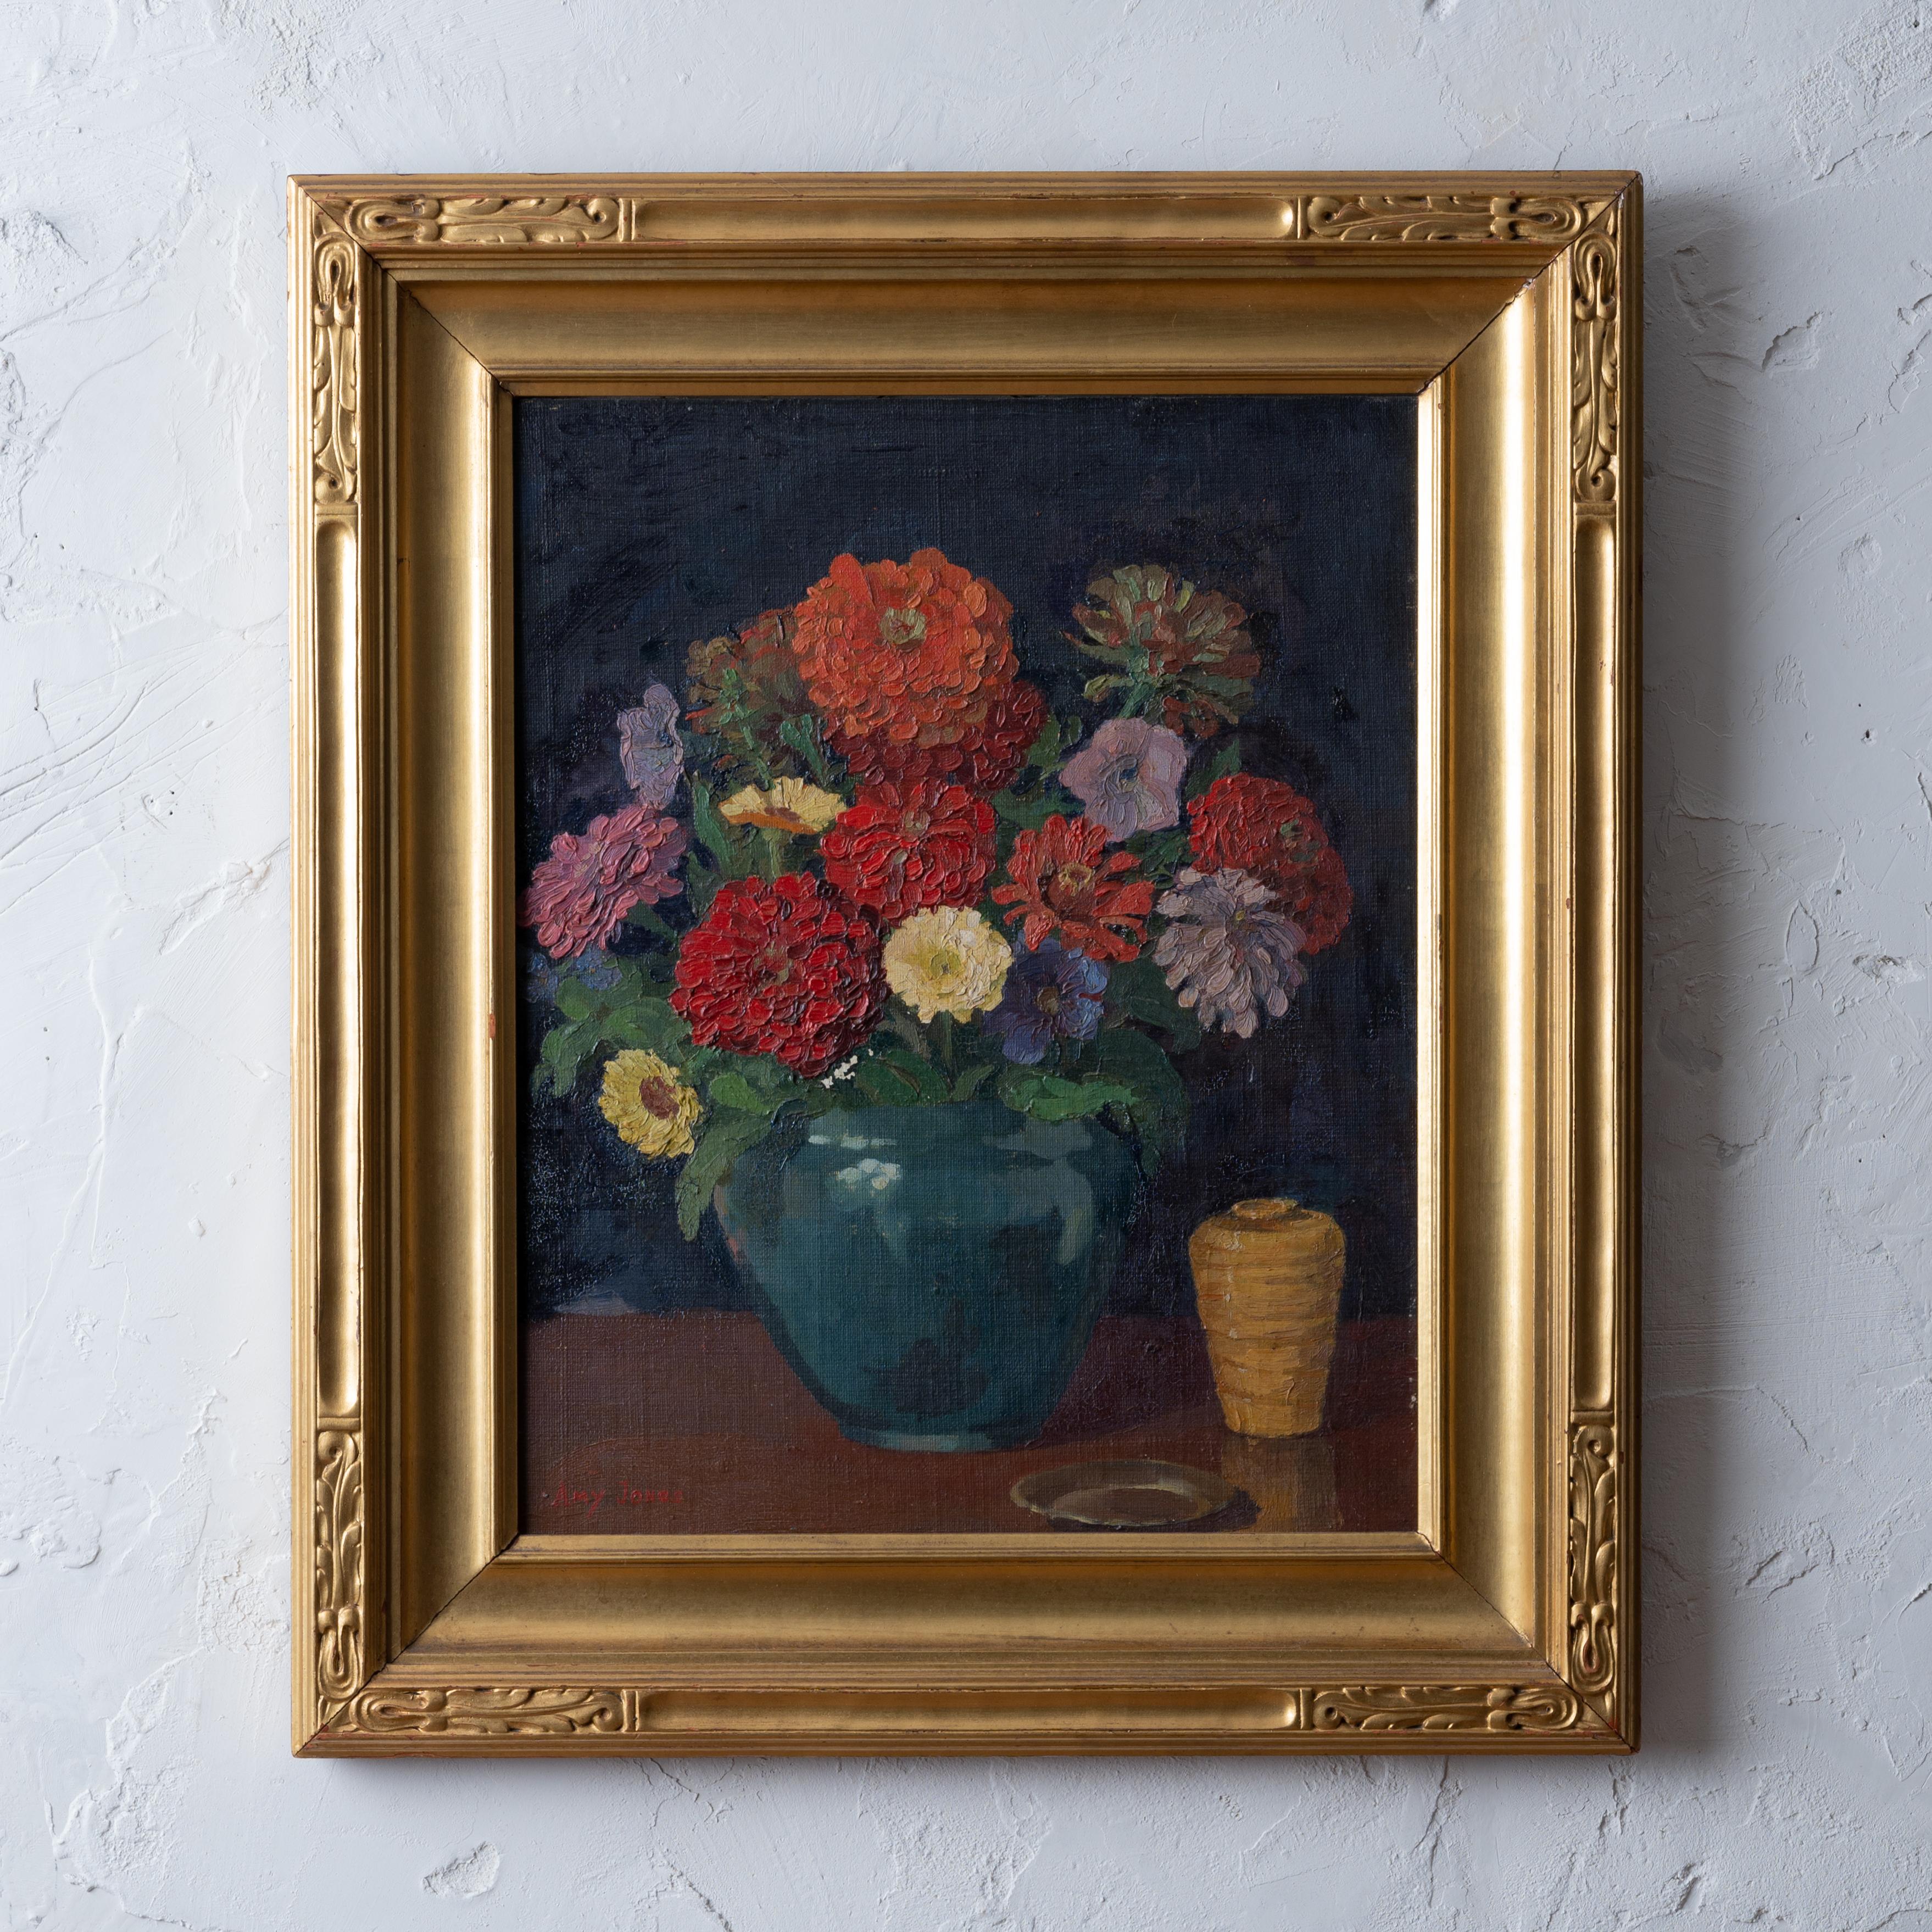 Amy Jones (Frisbie)
(New York, 1899-1992)

Still life with zinnias in original Newcomb-Macklin frame, c.1930.
Signed lower left. Artists name and address on verso: 